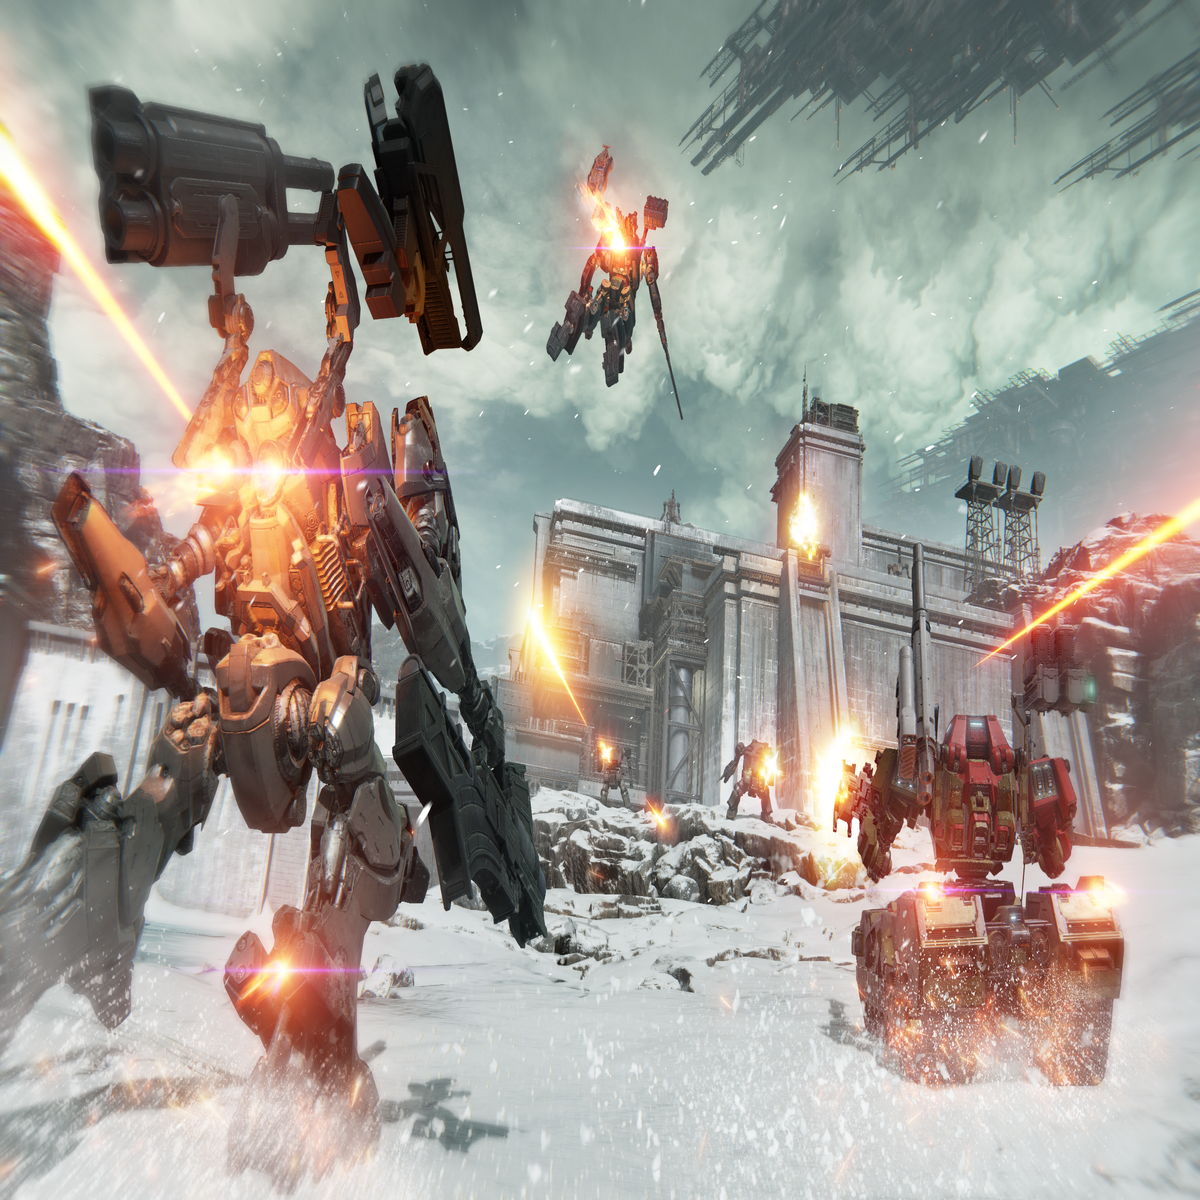 Armored Core 6 feels brilliant in the hands, but also strangely undecided